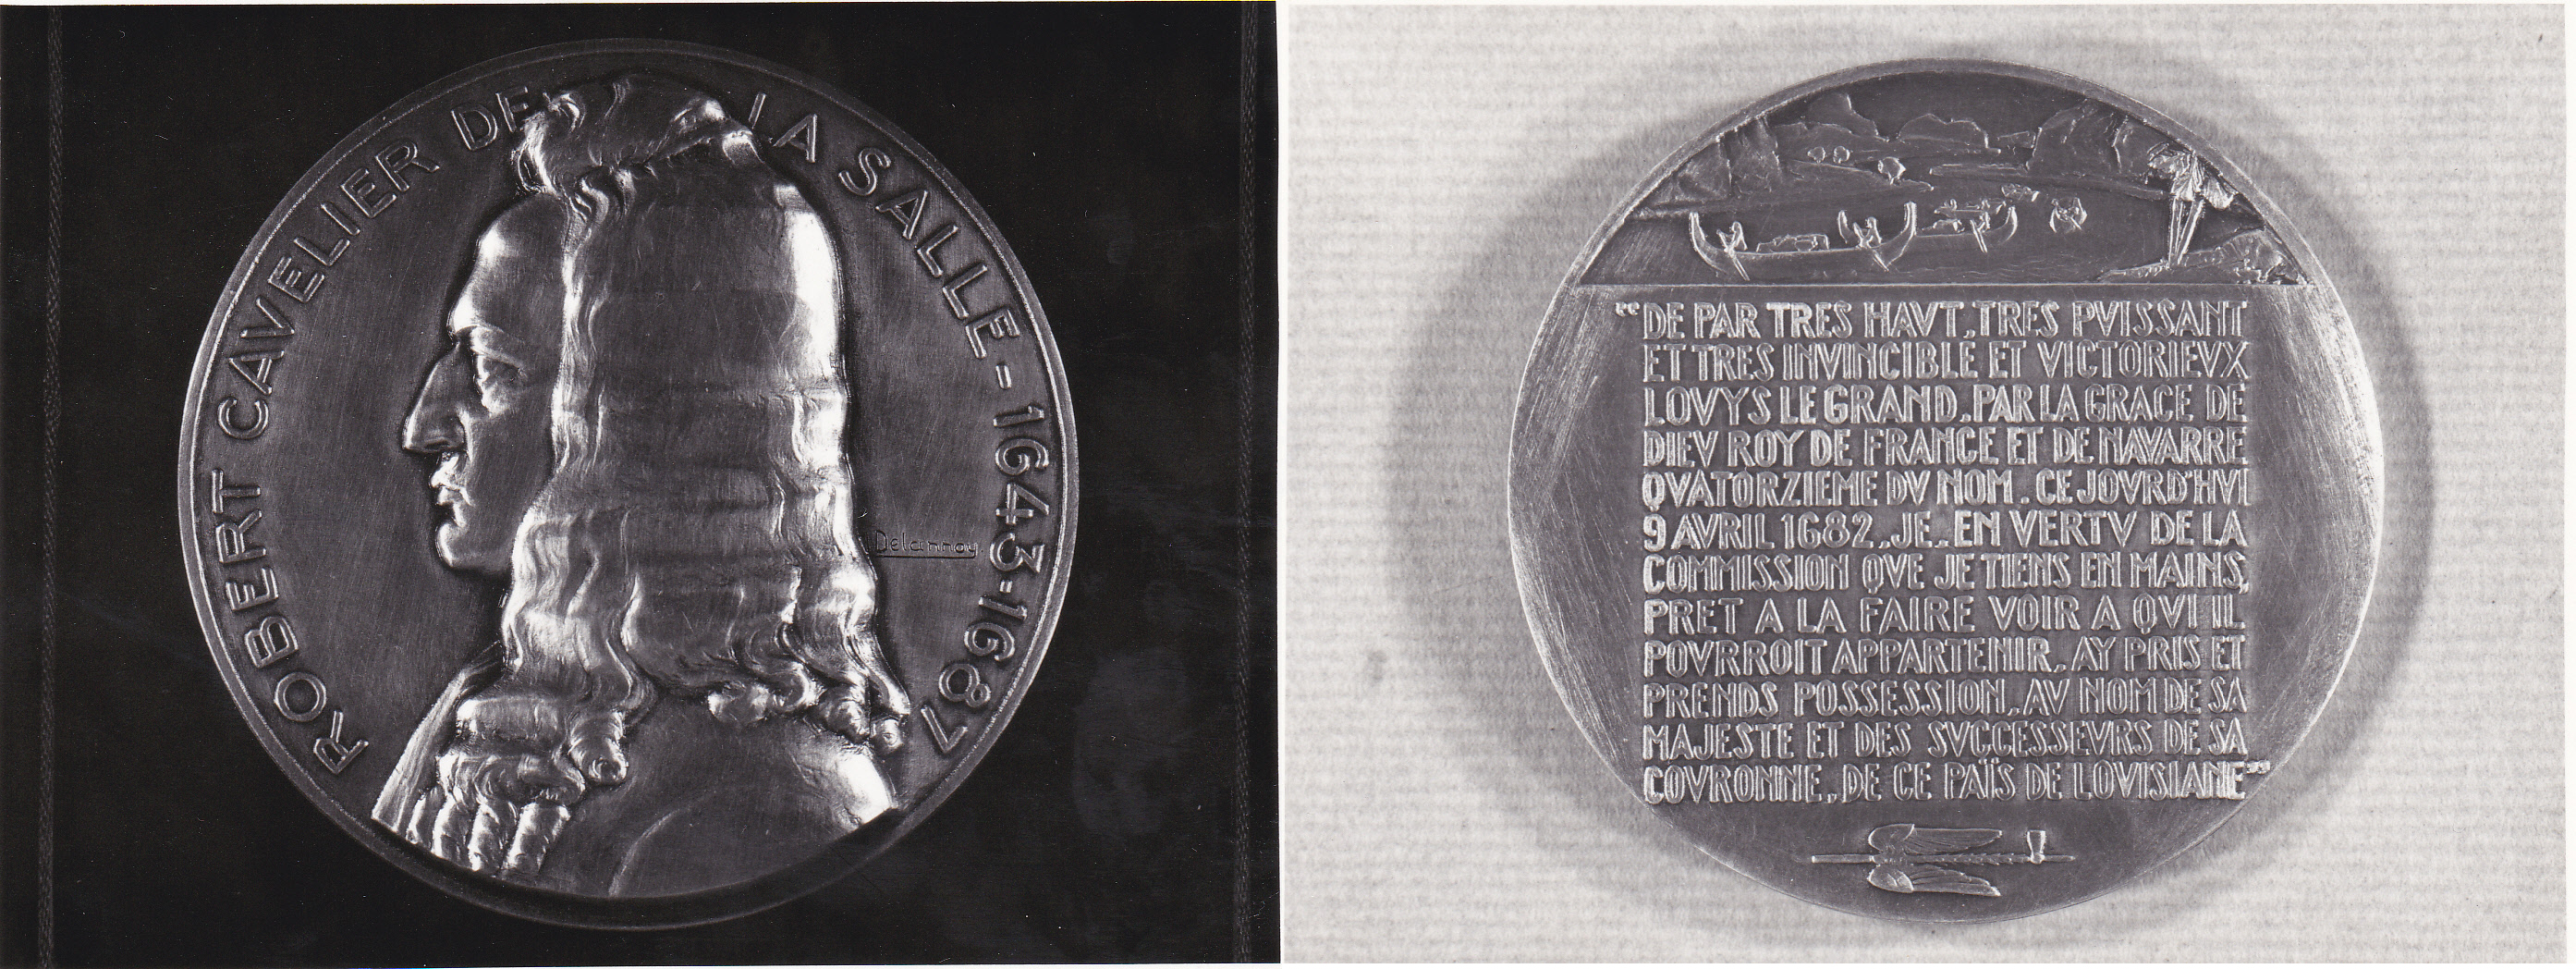 Object: Commemorative Coin (French)